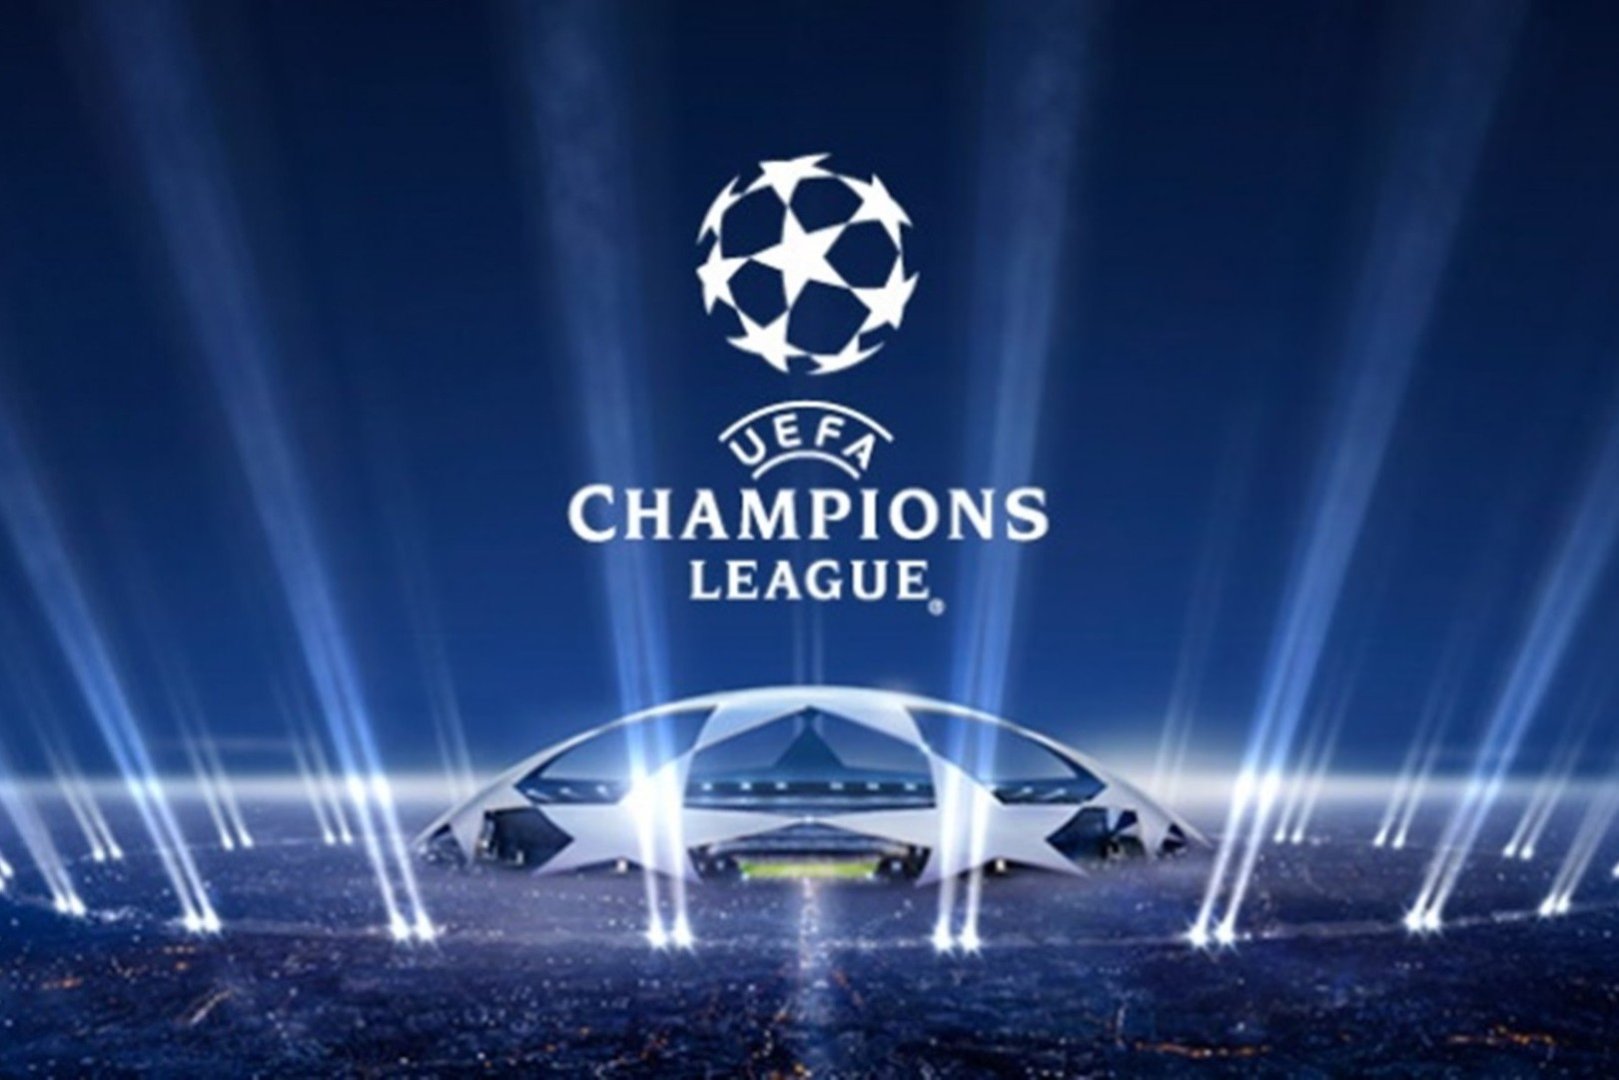 Another potential opponent of Azerbaijan's Qarabag FC in UEFA Champions League determined